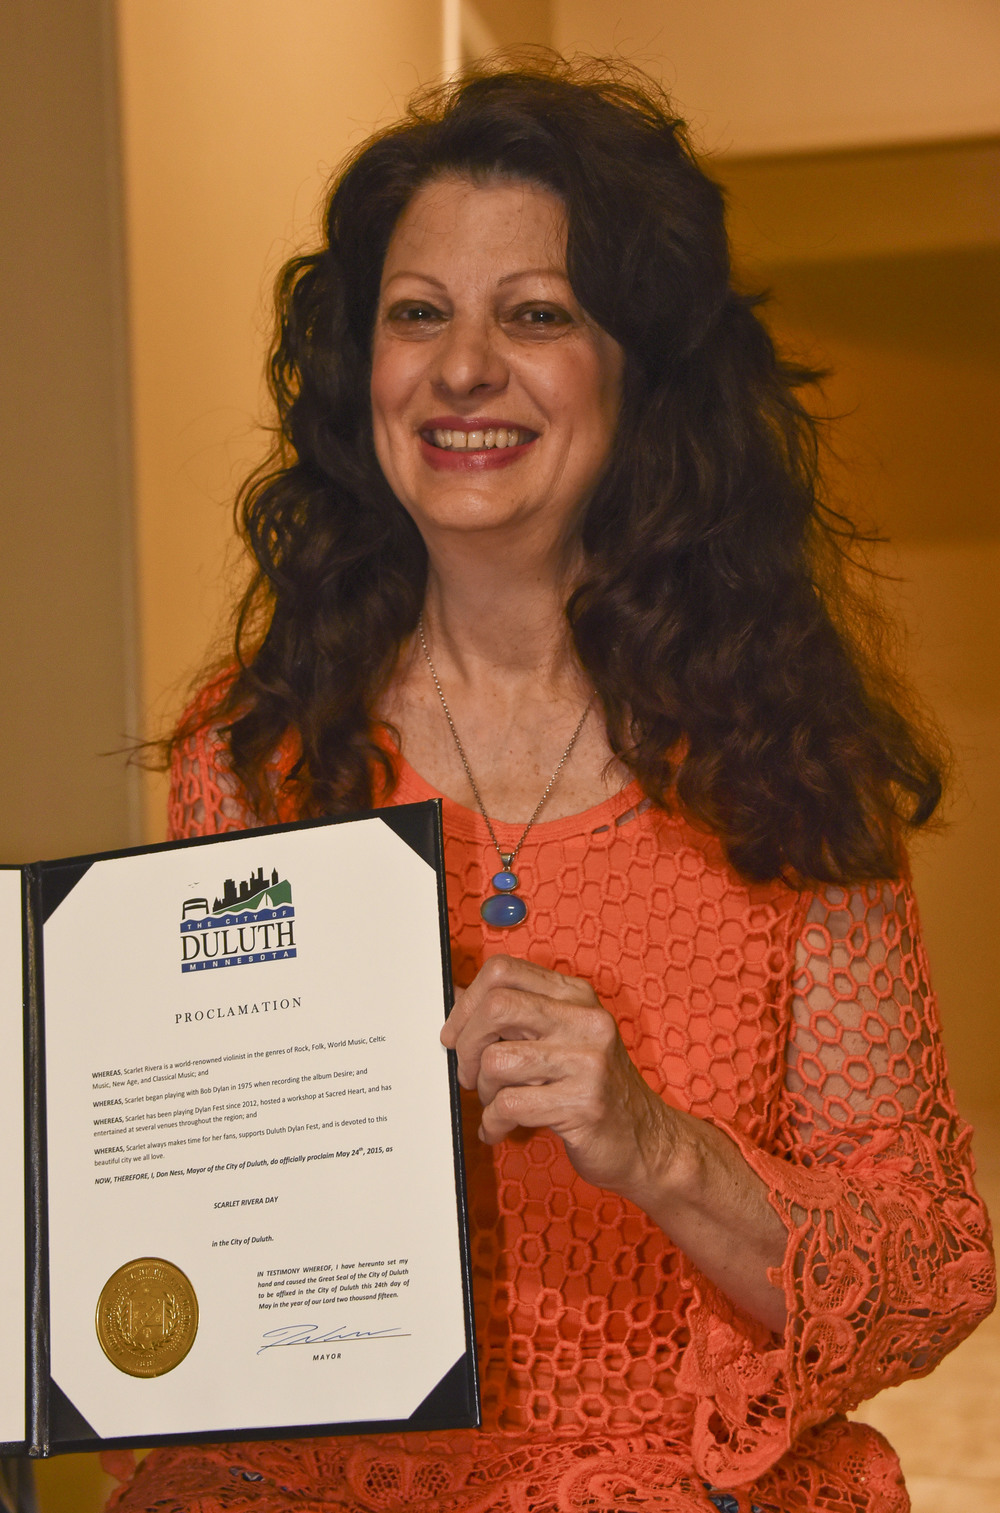  Scarlet Rivera holding the Proclamation for her day / Sacred Heart Music Center / Duluth, Minnesota / May 23rd, 2015 / Photo by Michael K. Anderson 